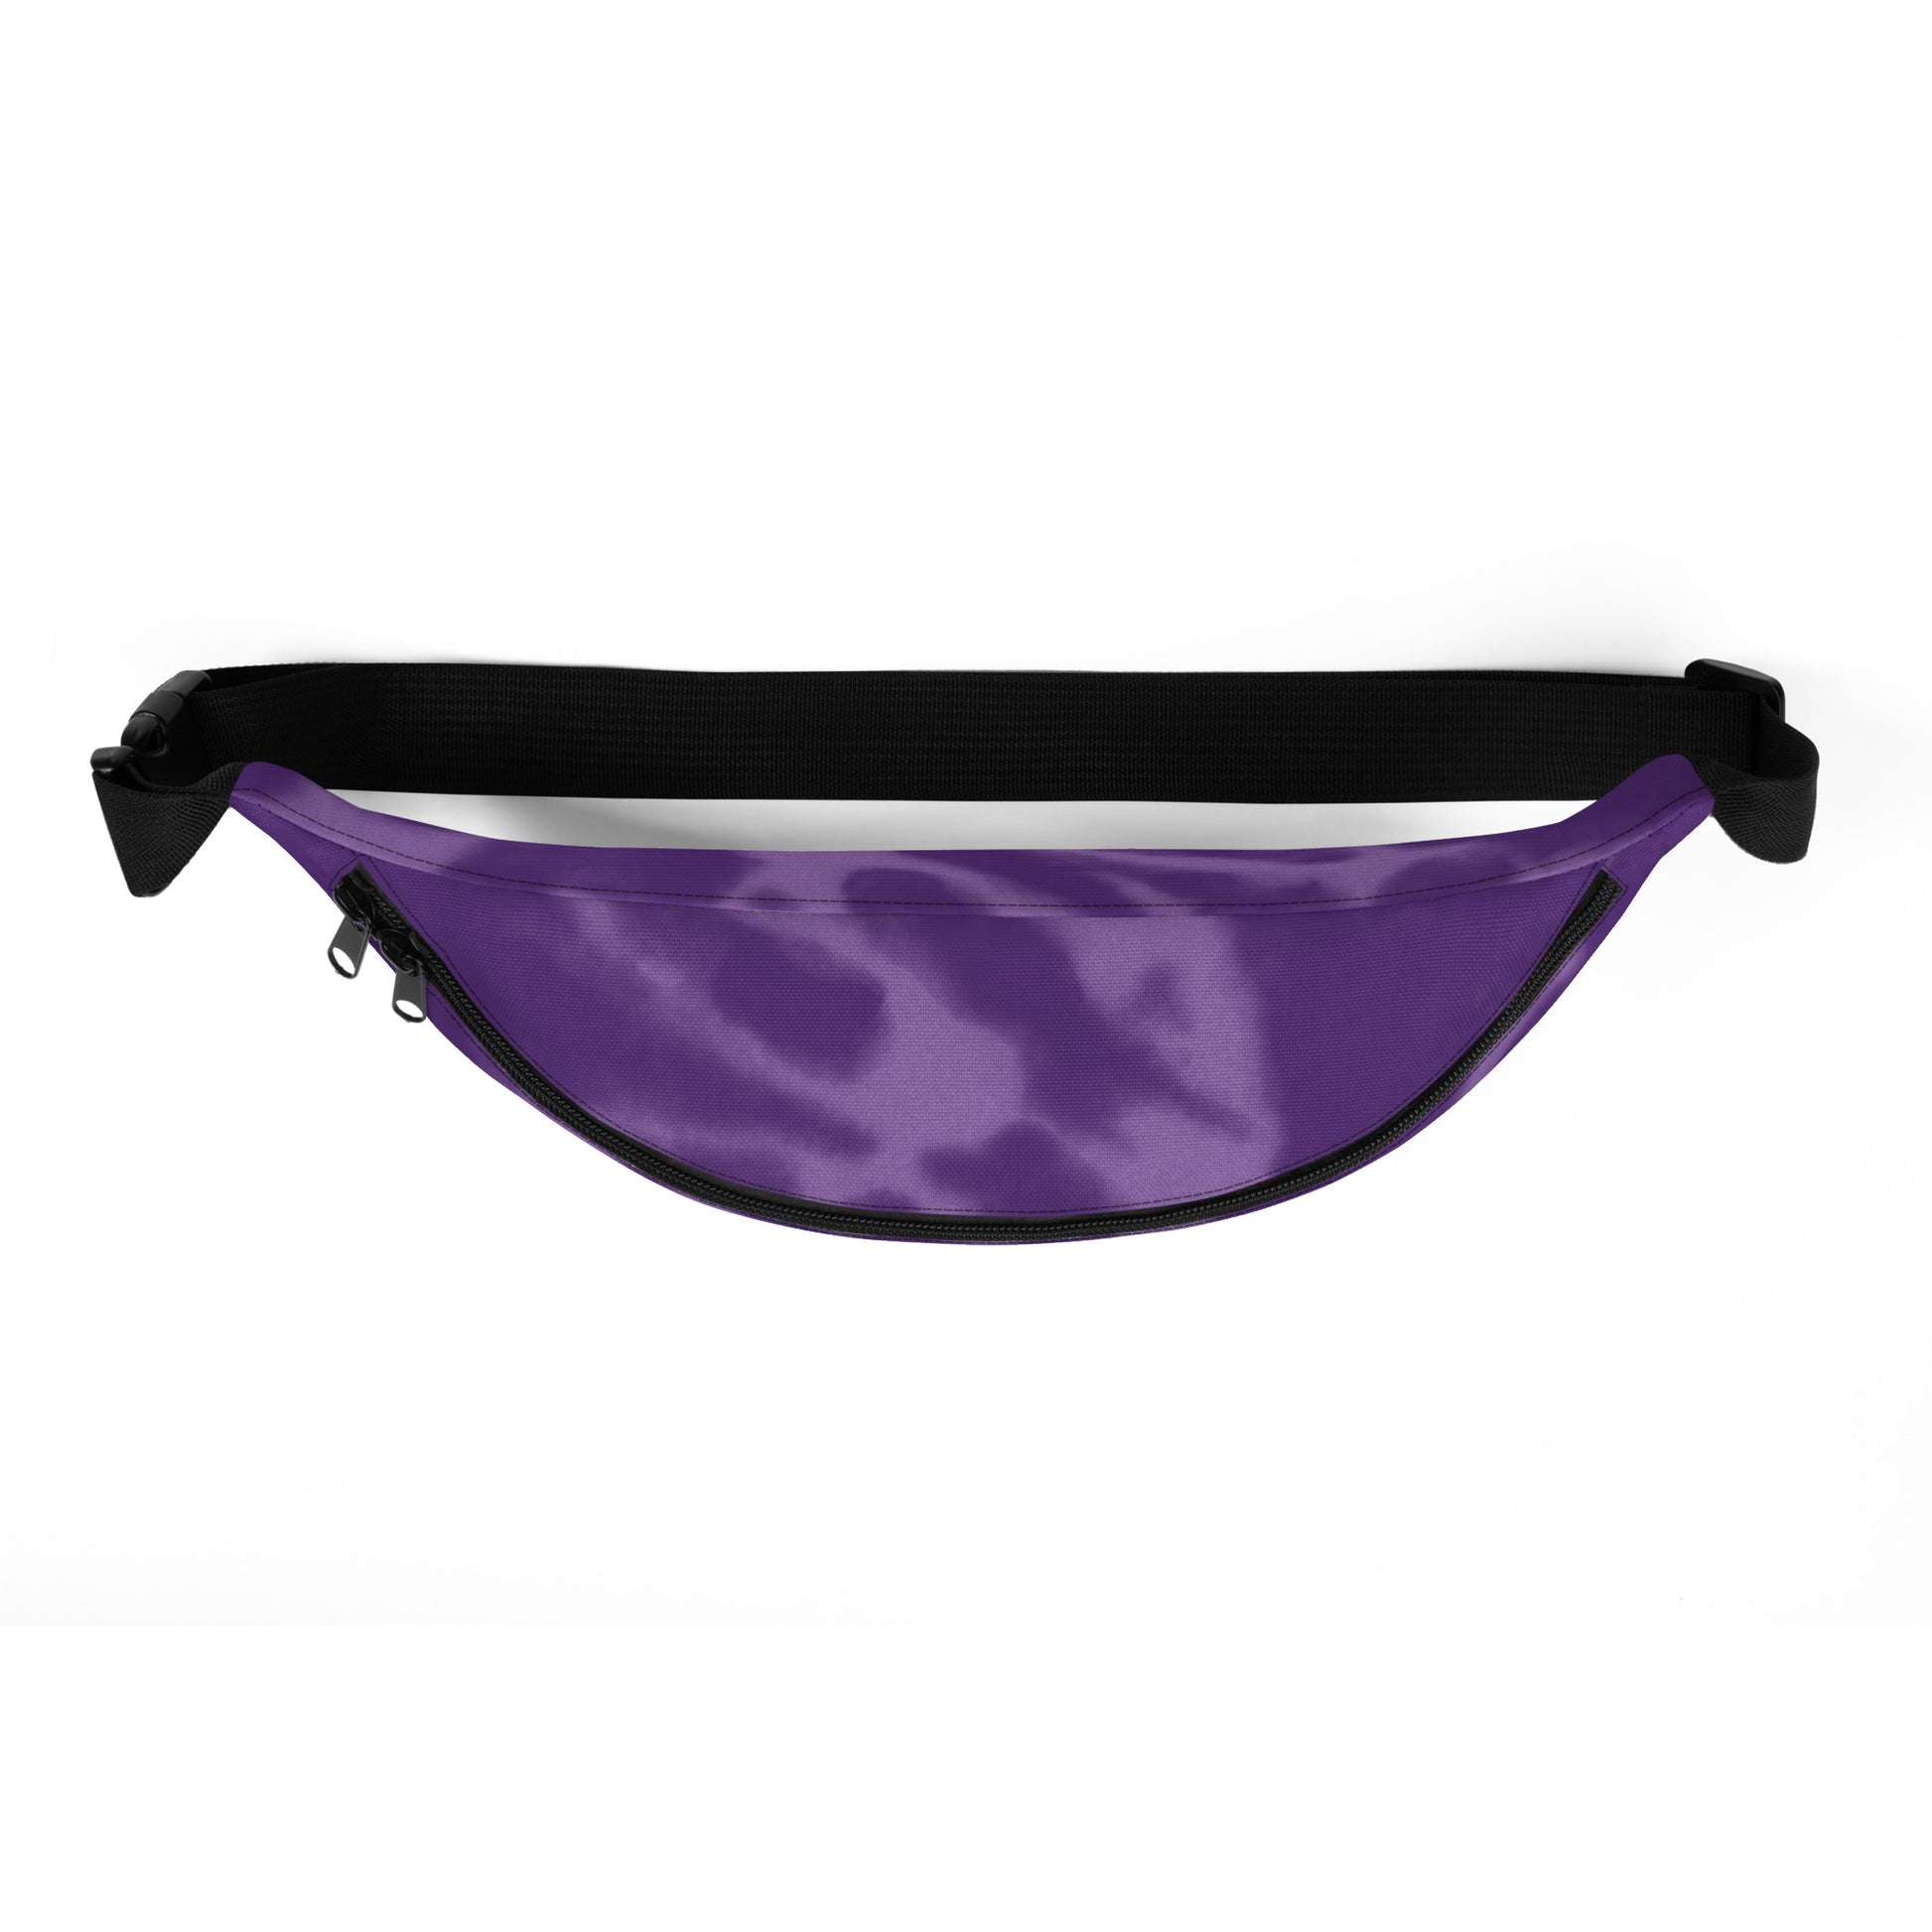 Travel Gift Fanny Pack - Purple Tie-Dye • MSY New Orleans • YHM Designs - Image 08